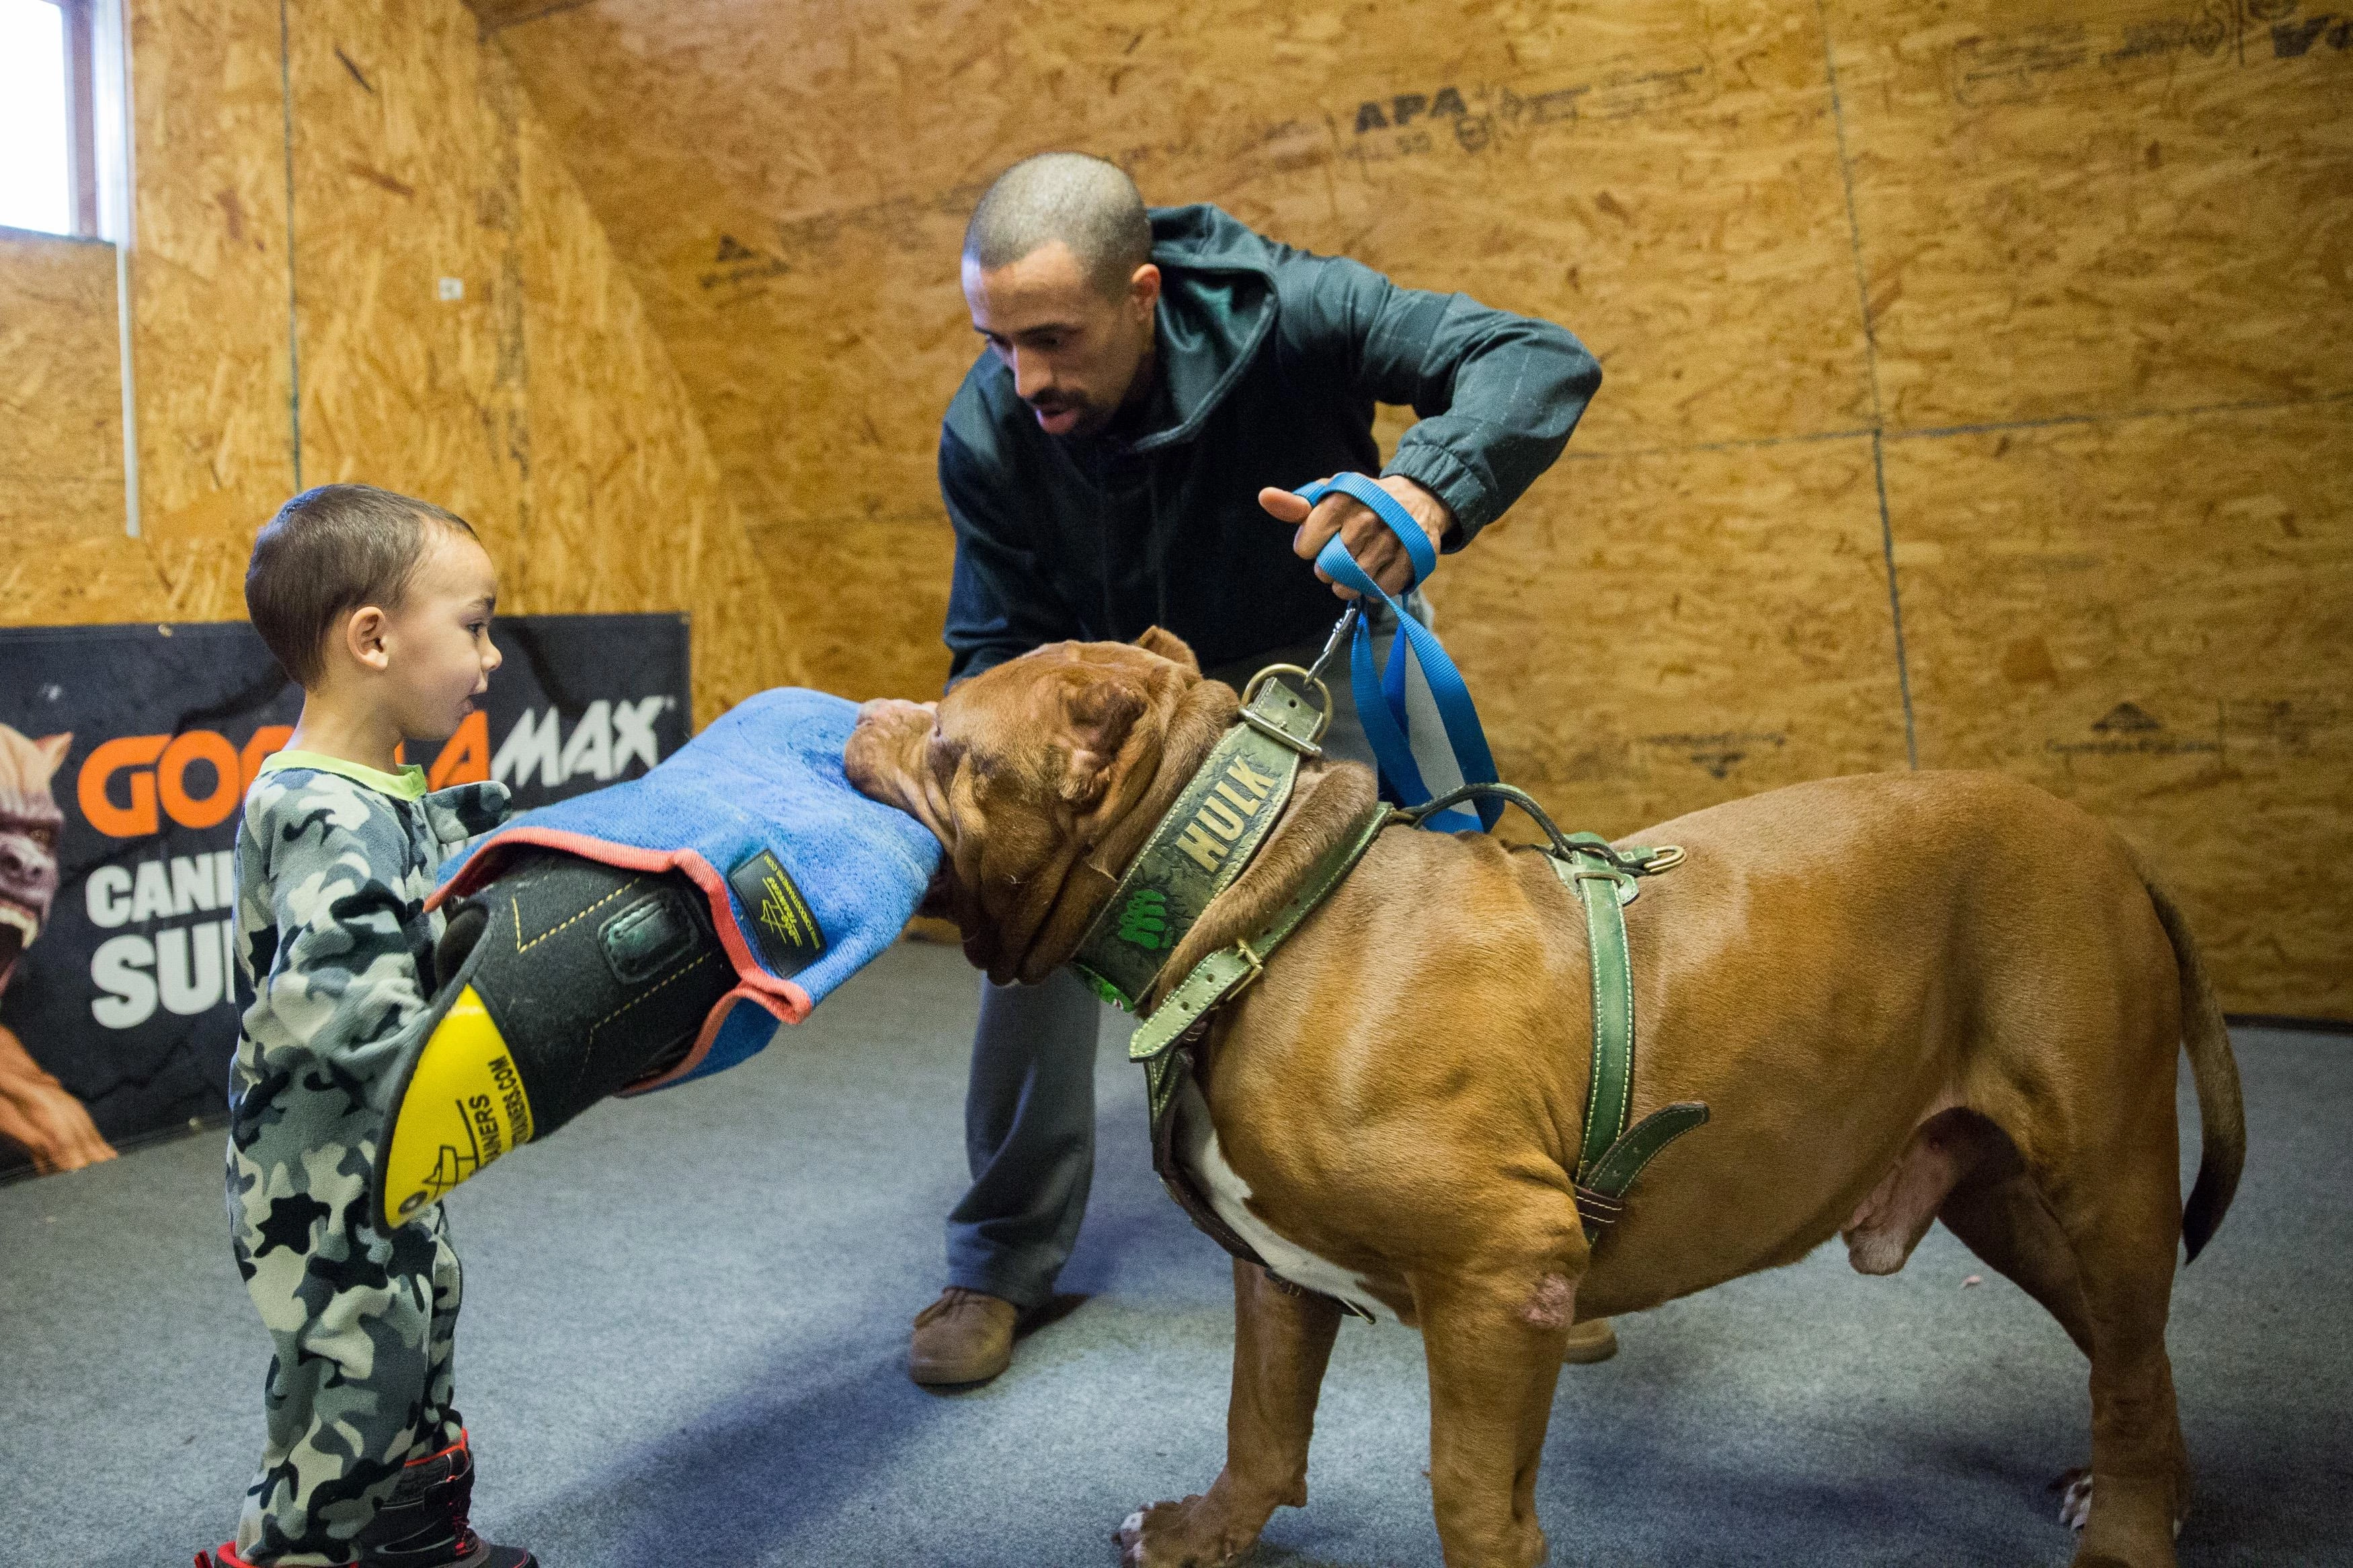 Recap: The World’s Biggest Pitbull Is A Gentle Giant